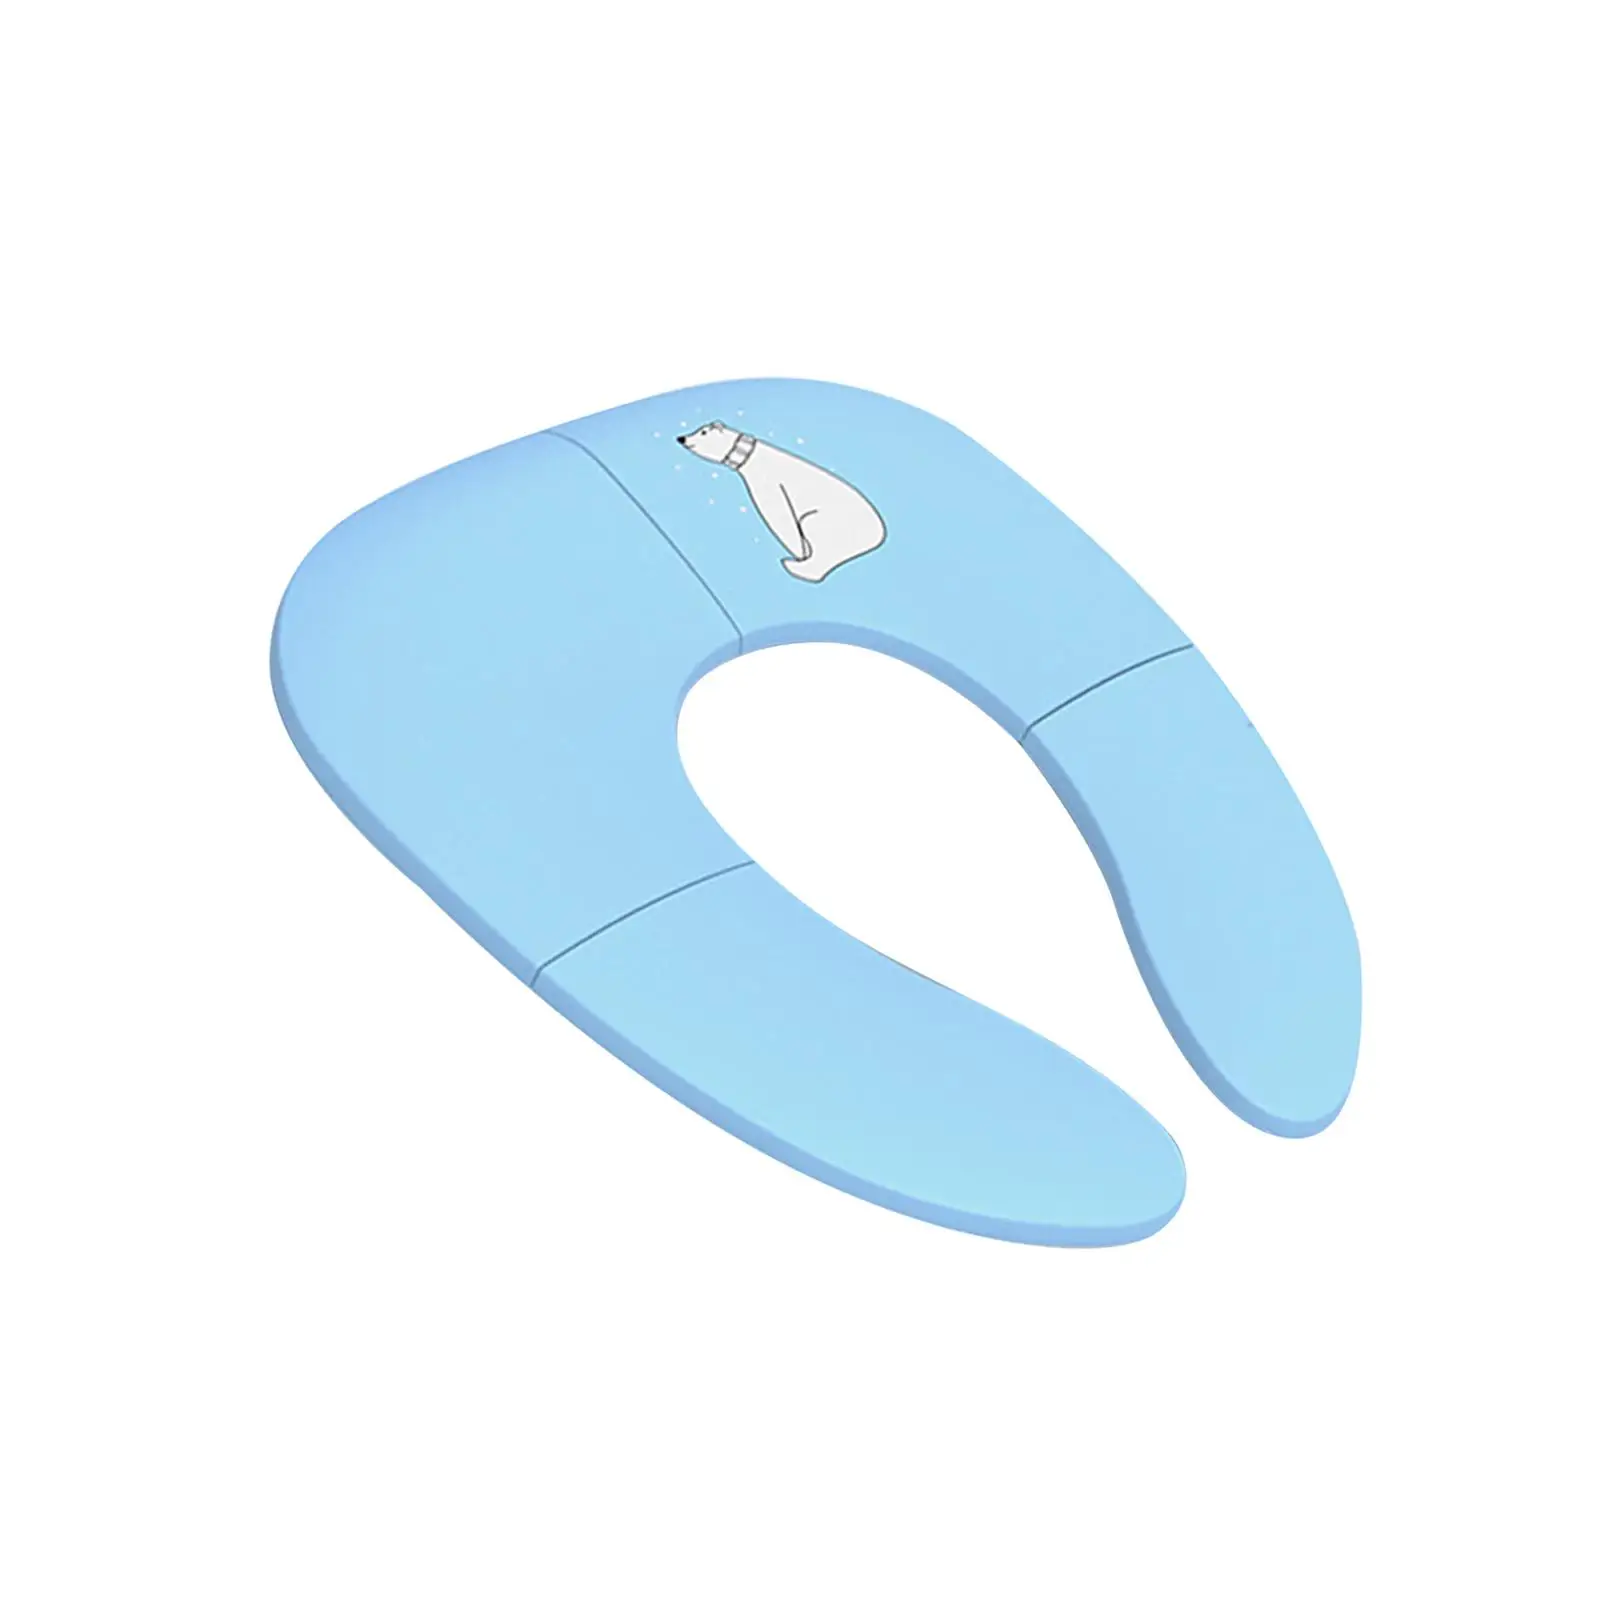 Foldable Toilet Cover Upgraded training Seat Non Slip Toilet Seat Toilet Ring for Baby Toddler Kids Adults Child